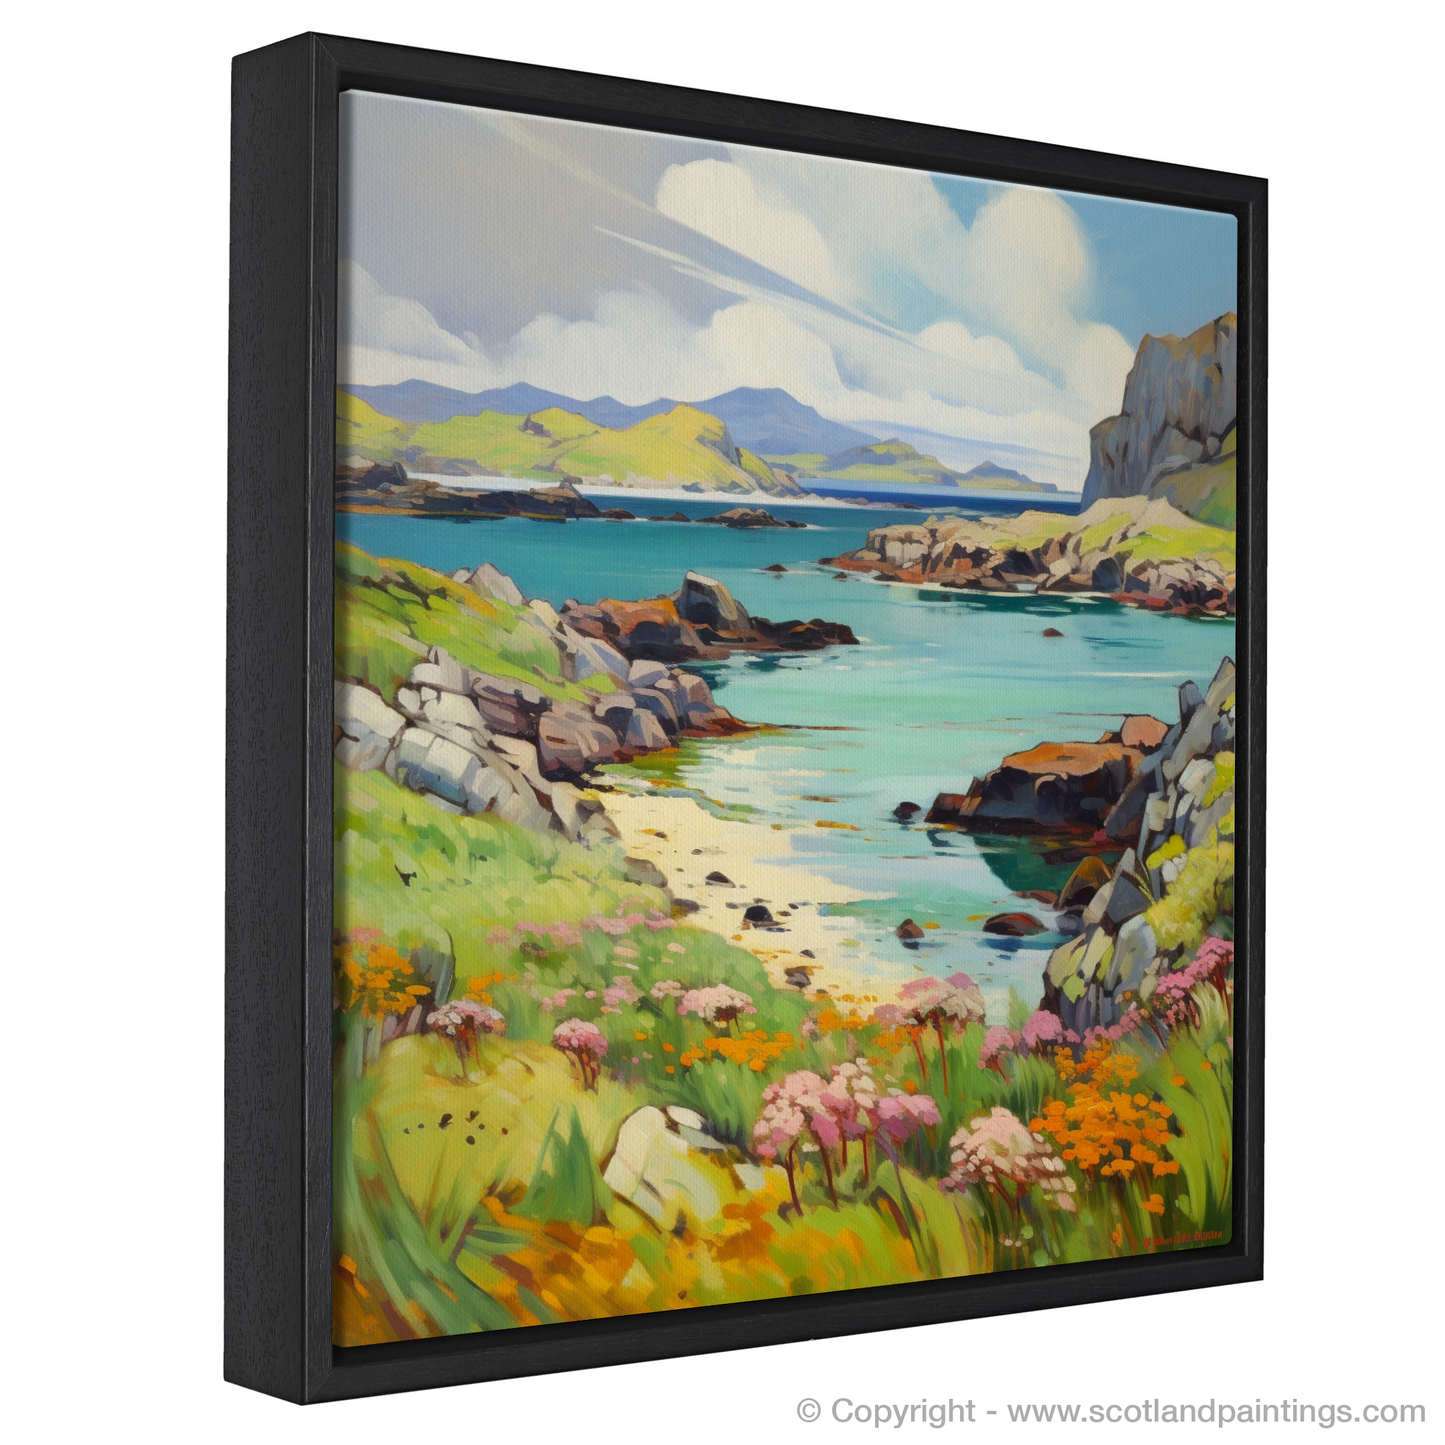 Painting and Art Print of Isle of Mull, Inner Hebrides in summer entitled "Isle of Mull Summer Radiance".